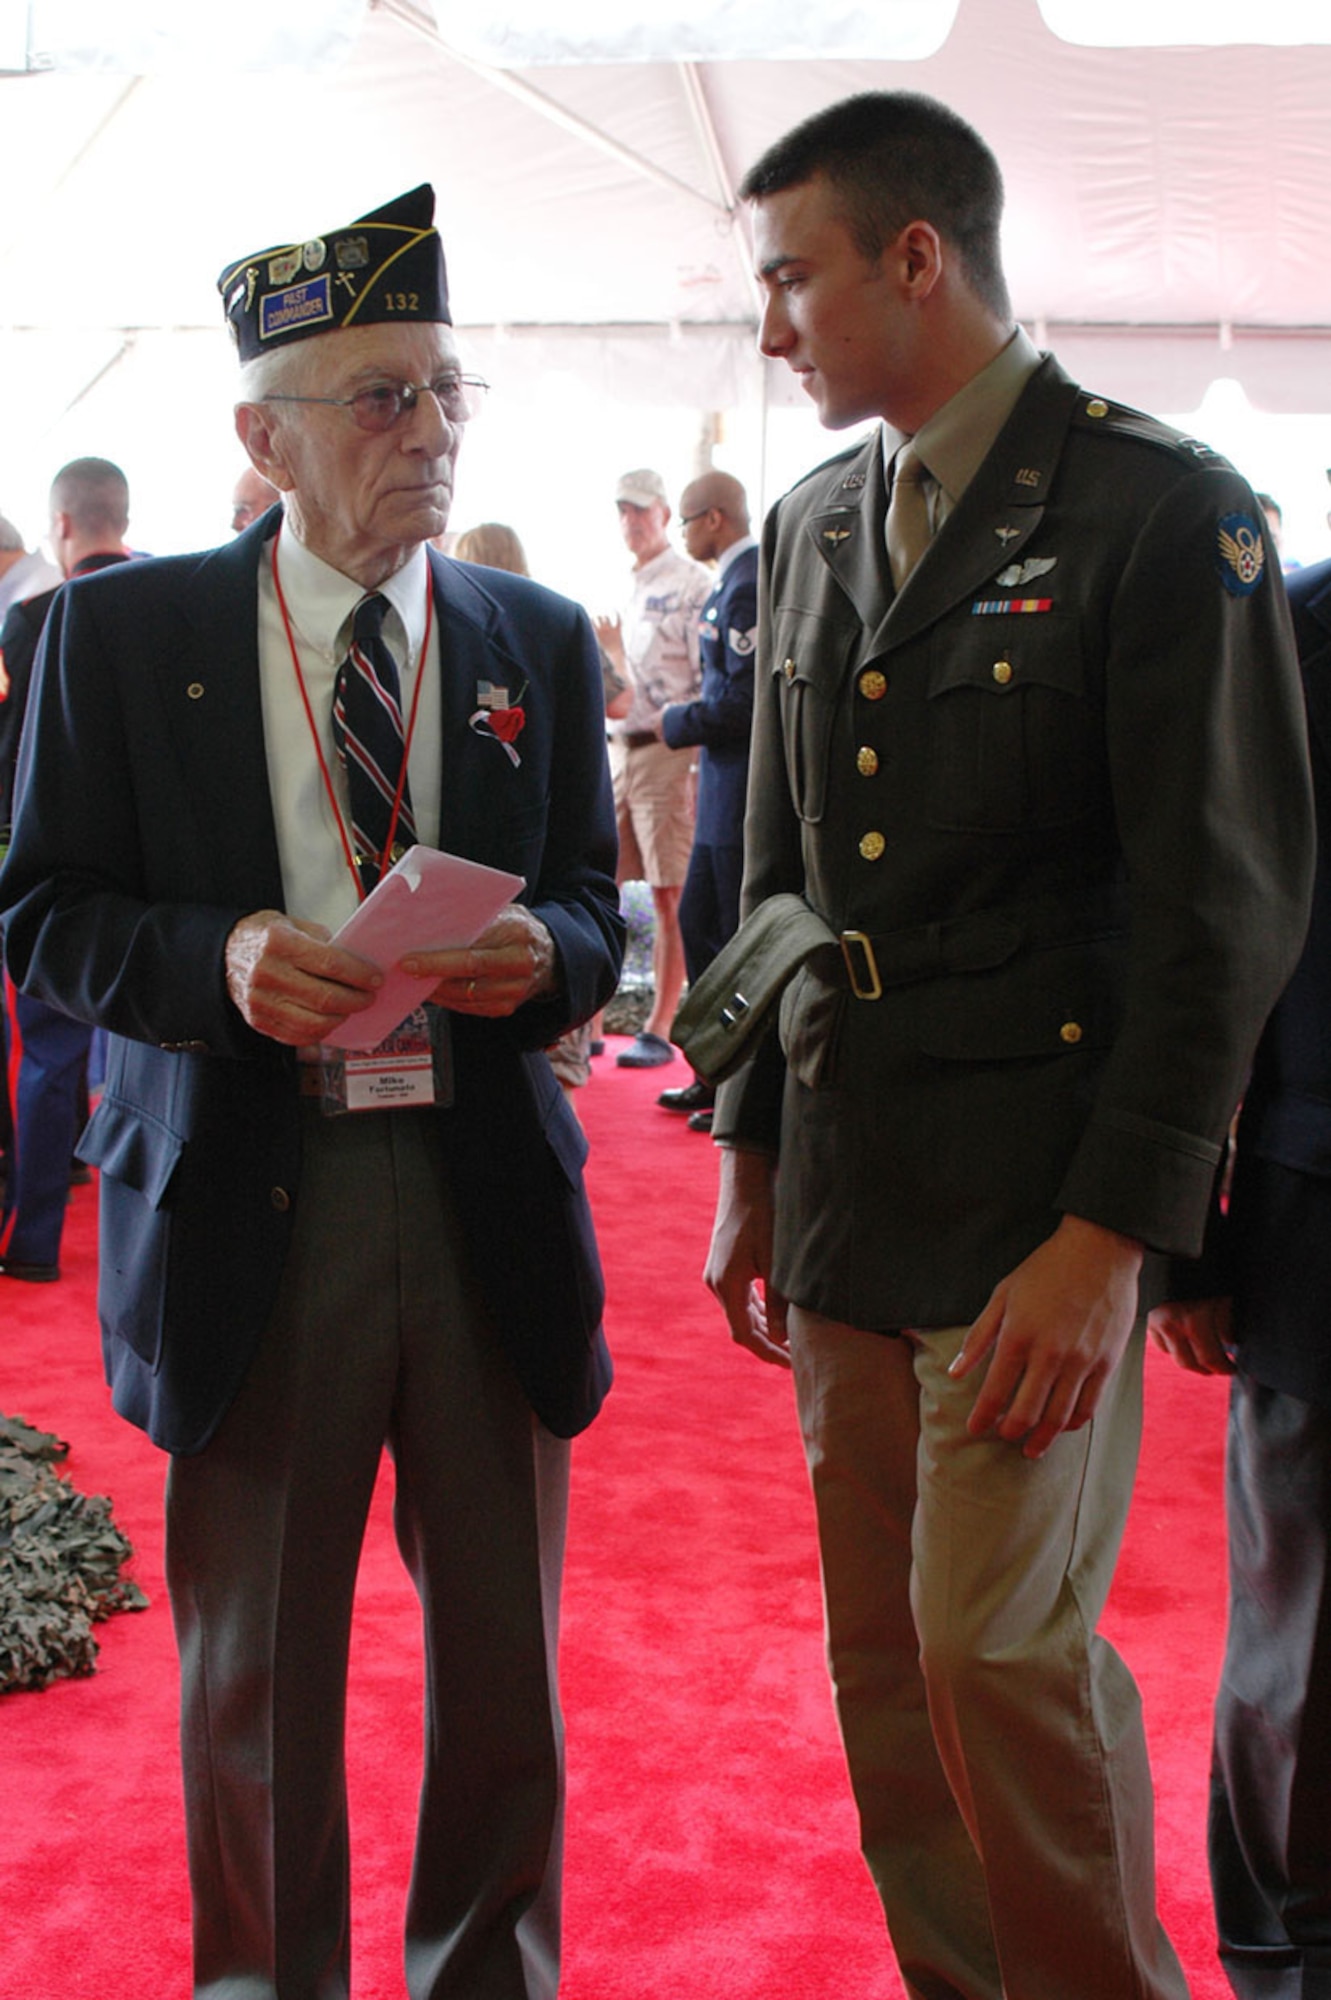 The son of Col. Steven Nordhaus, 180th Fighter Wing Commander, speaks with a World War II veteran at the Stage Door Canteen, hosted by the 180th Fighter Wing and Honor Flight of Northwest Ohio, May 21 at the 180th Fighter Wing.